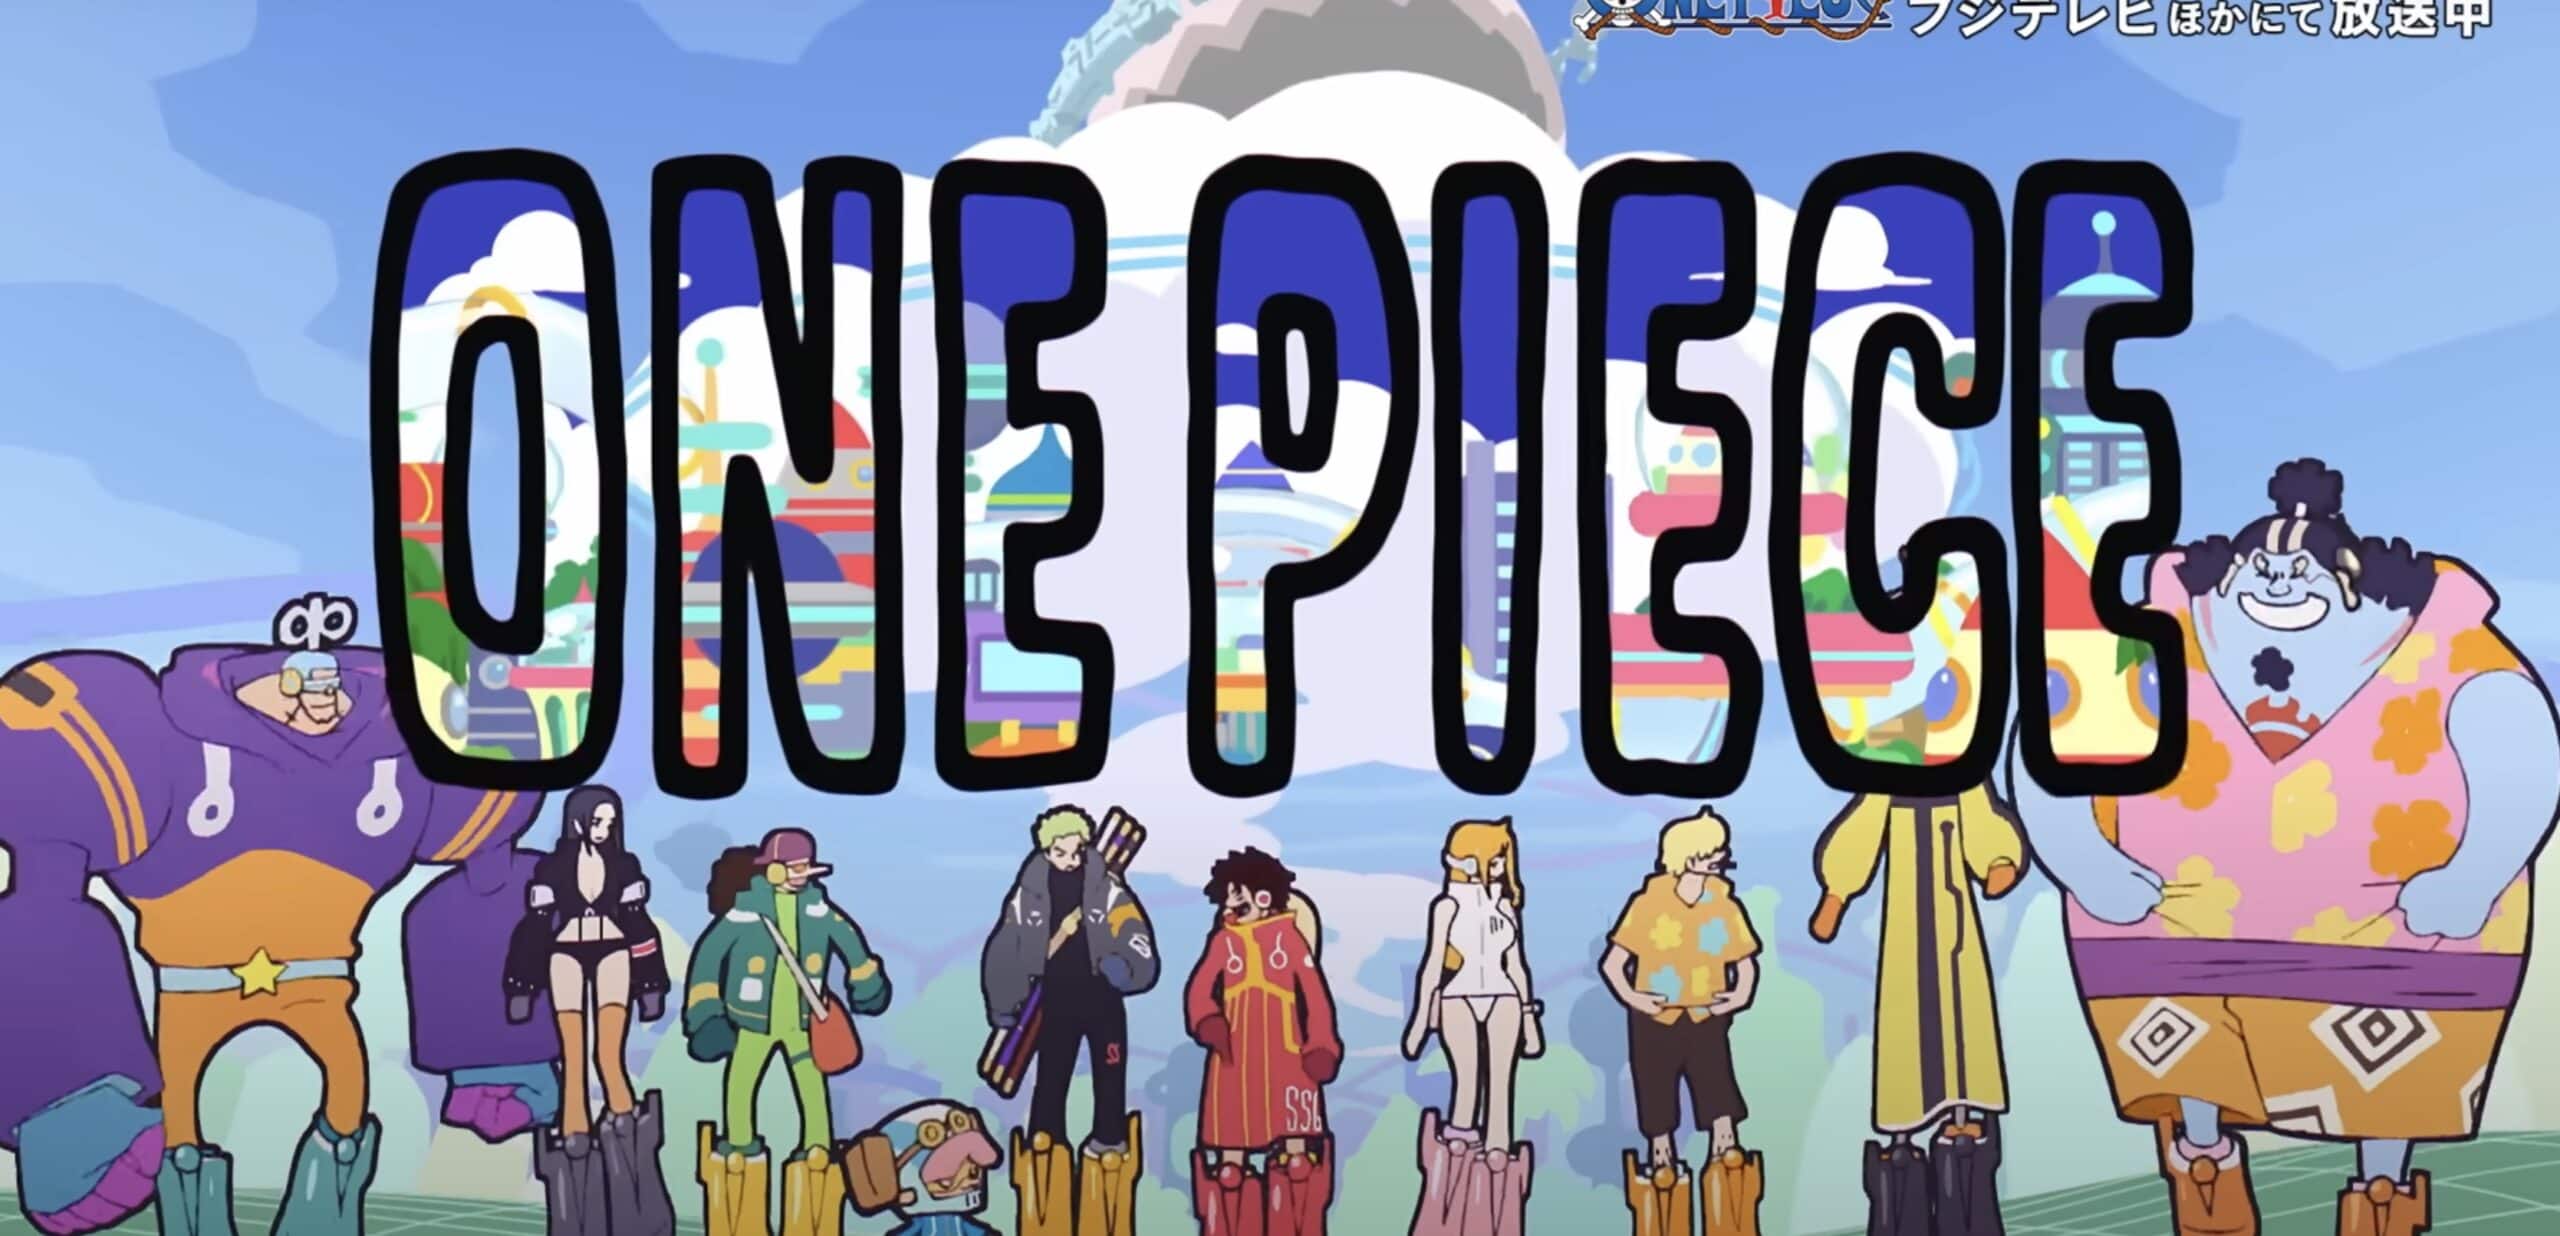 One Piece Brings Back The Singer Who Sang The First Ending Song For One Piece